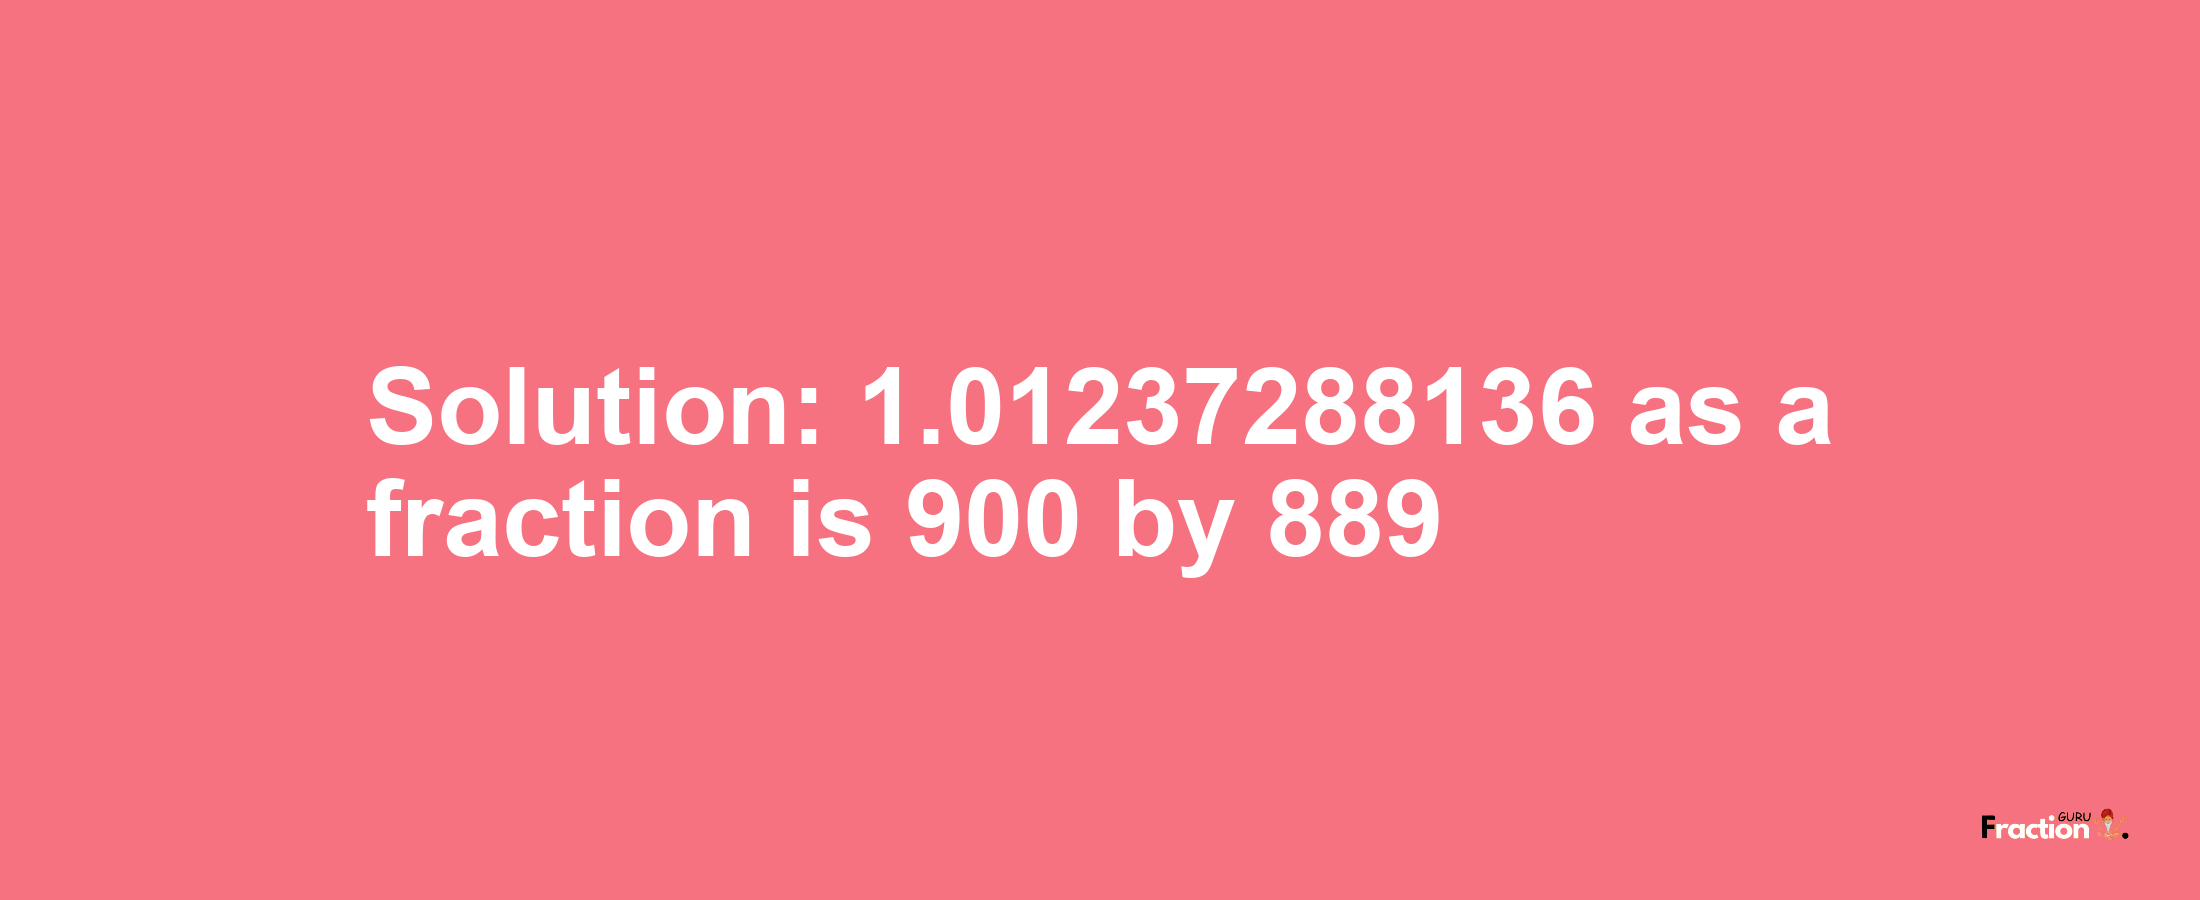 Solution:1.01237288136 as a fraction is 900/889